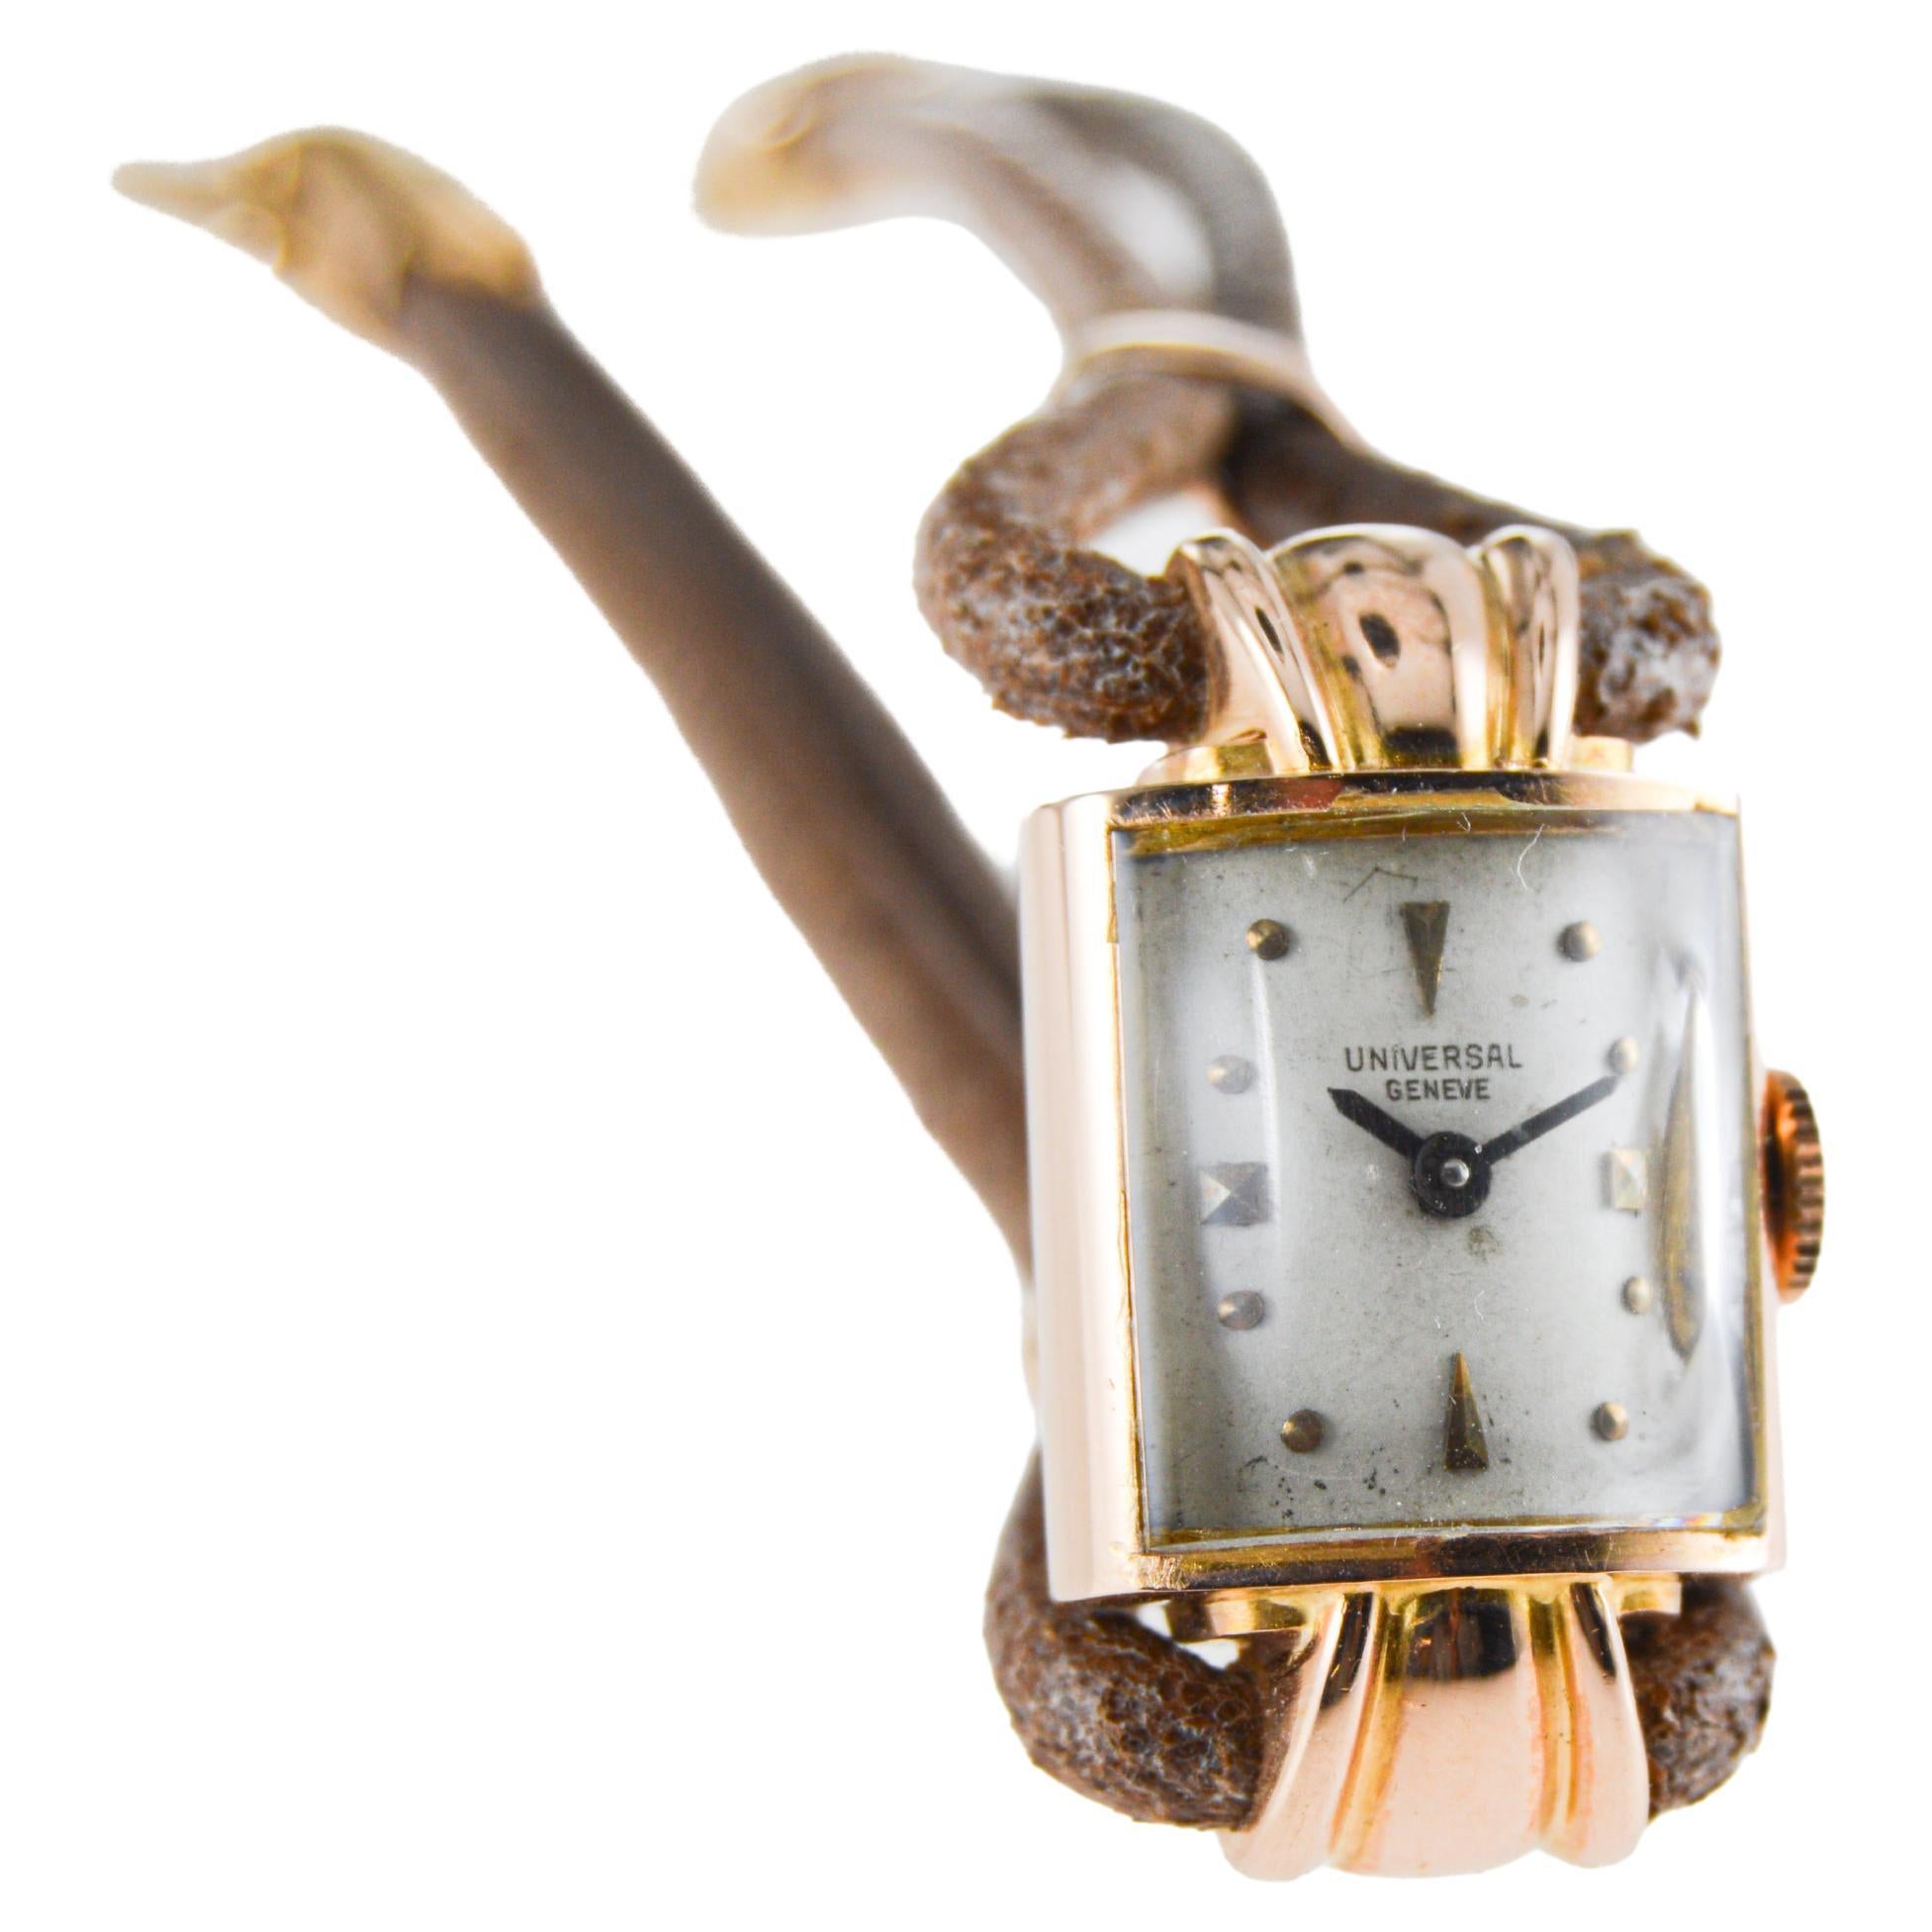 Universal Geneve 18Kt Pink Gold Art Deco Ladies Watch Hand Made from 1940's In Excellent Condition For Sale In Long Beach, CA